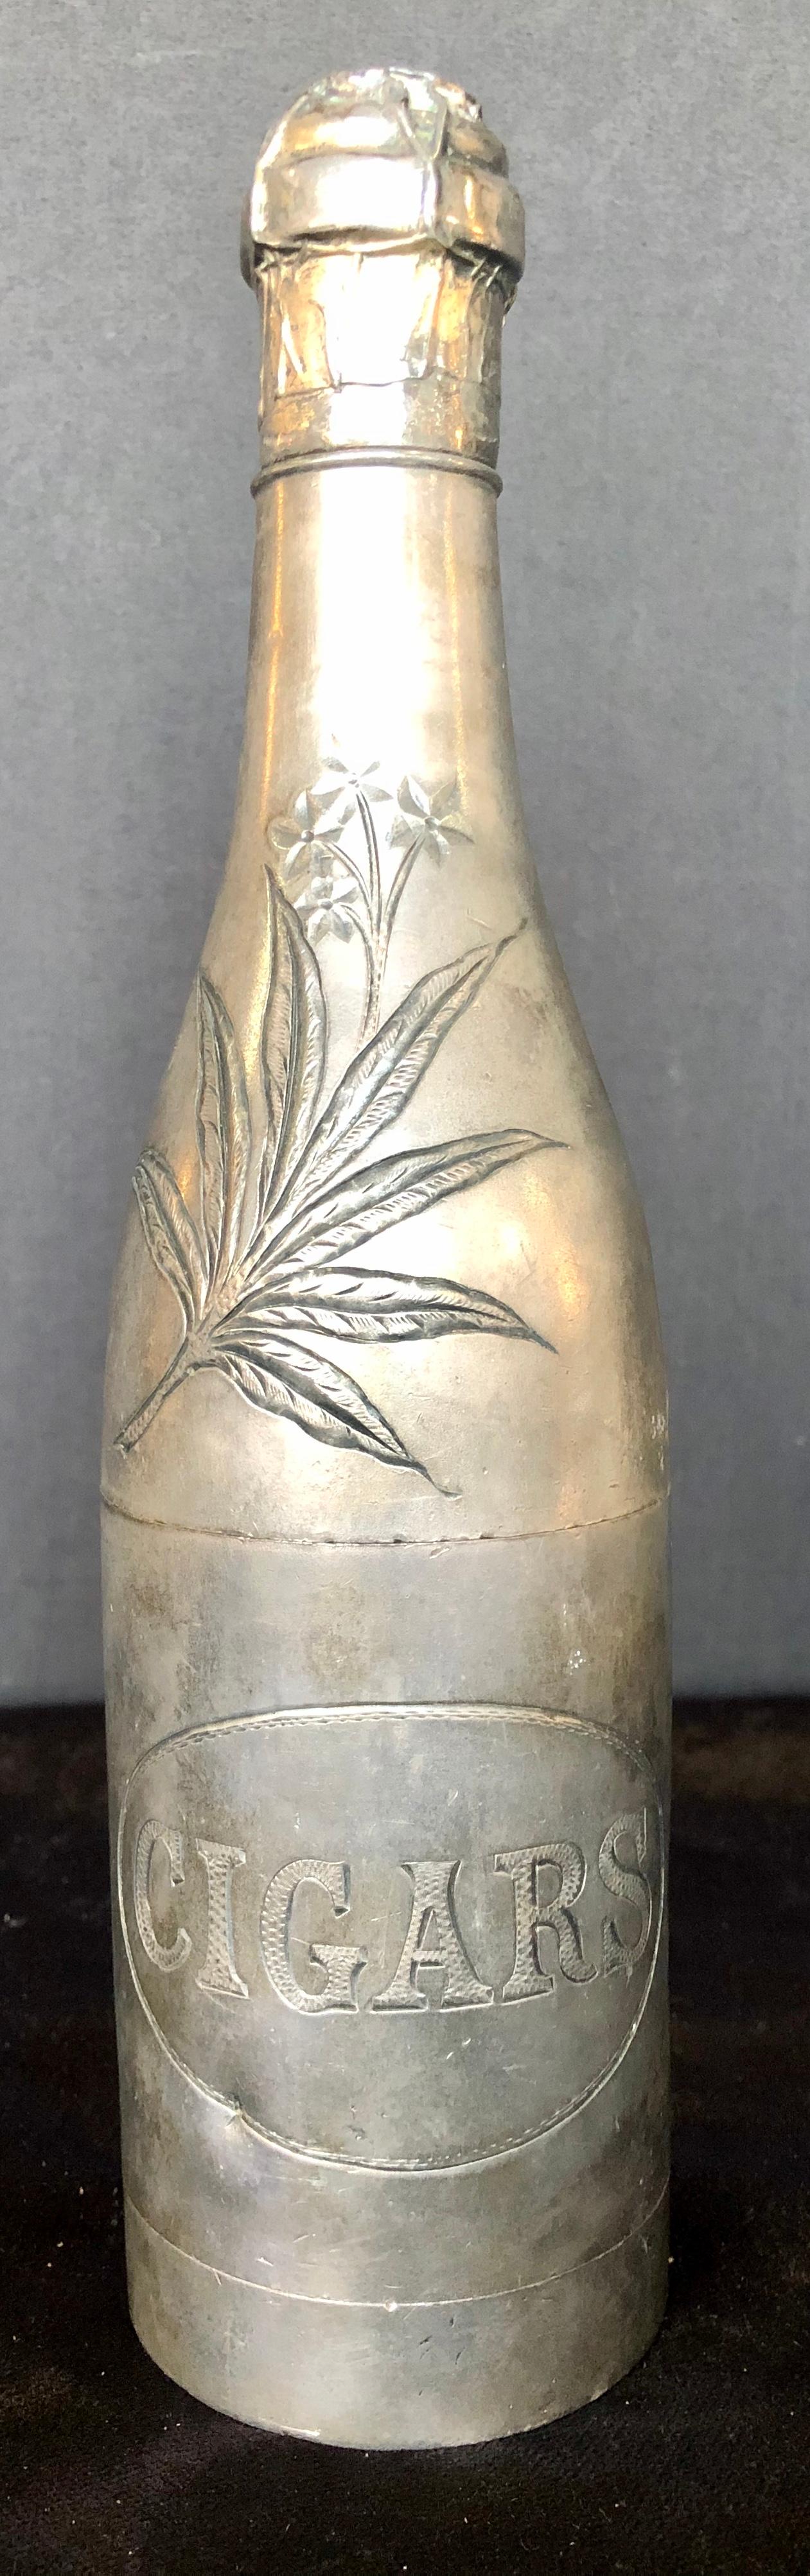 A silver plated, American 1920s, cigar holder in the shape of a Champagne bottle.
Well patinated silver plate. Very Gatsby-esque!
Wonderful detail to the top, with an engraved tobacco leaf.
The base is marked Pairpoint MFG CO, New Bedfortshire,